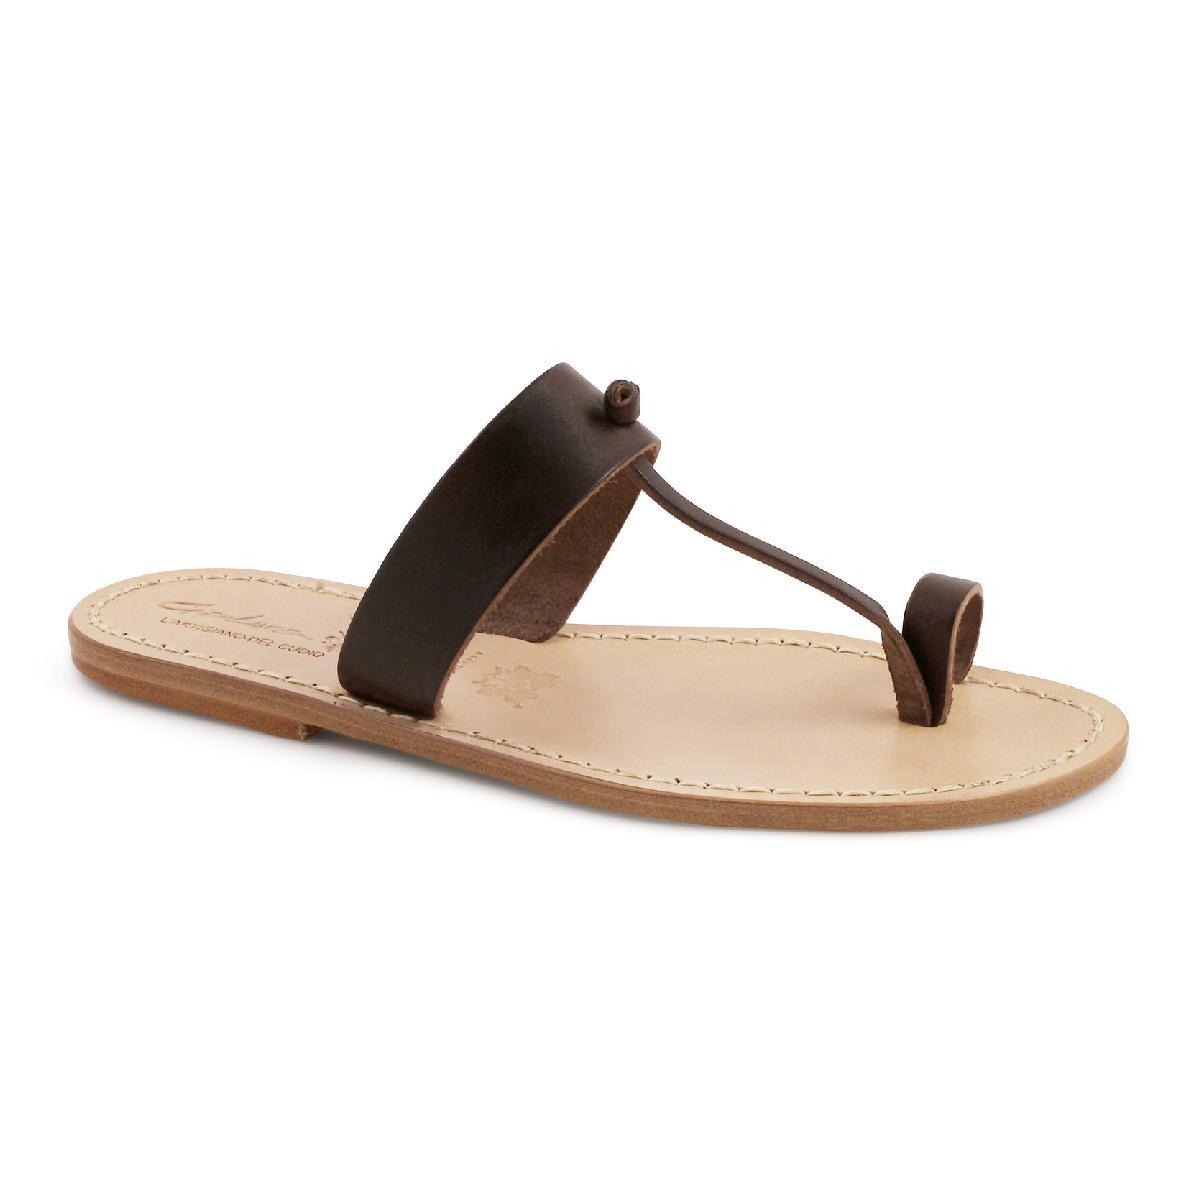 Brown leather thong sandals Handmade in Italy | Gianluca - The leather ...